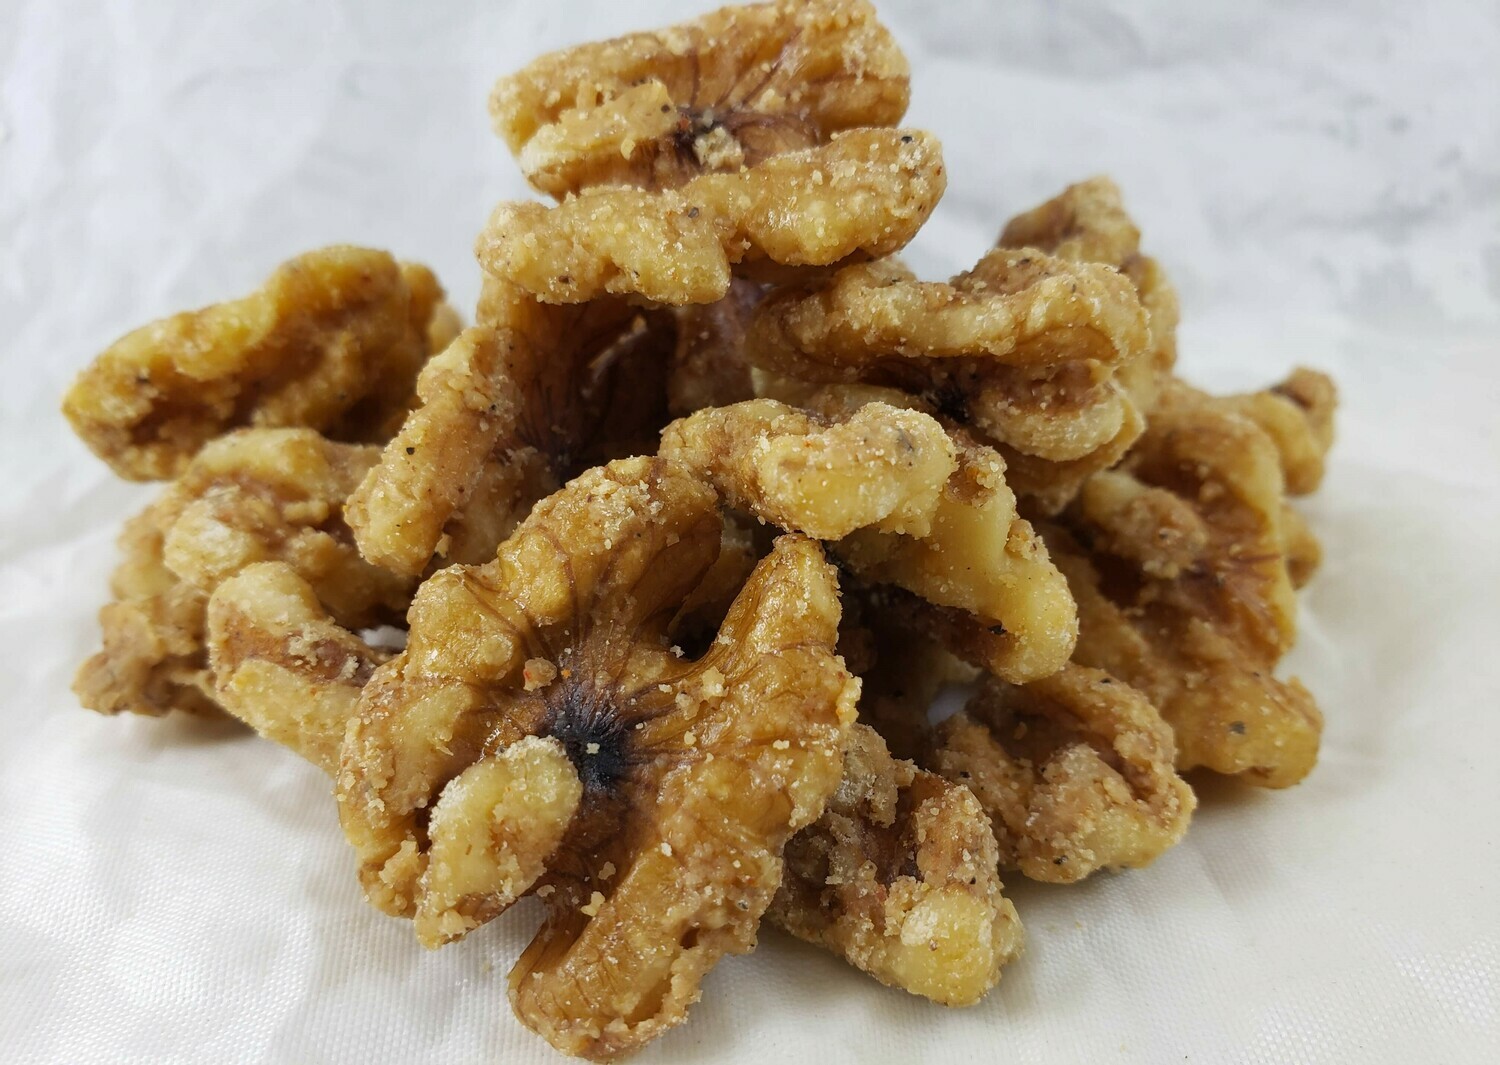 Cayenne Candied Walnuts, 3.5 ounces